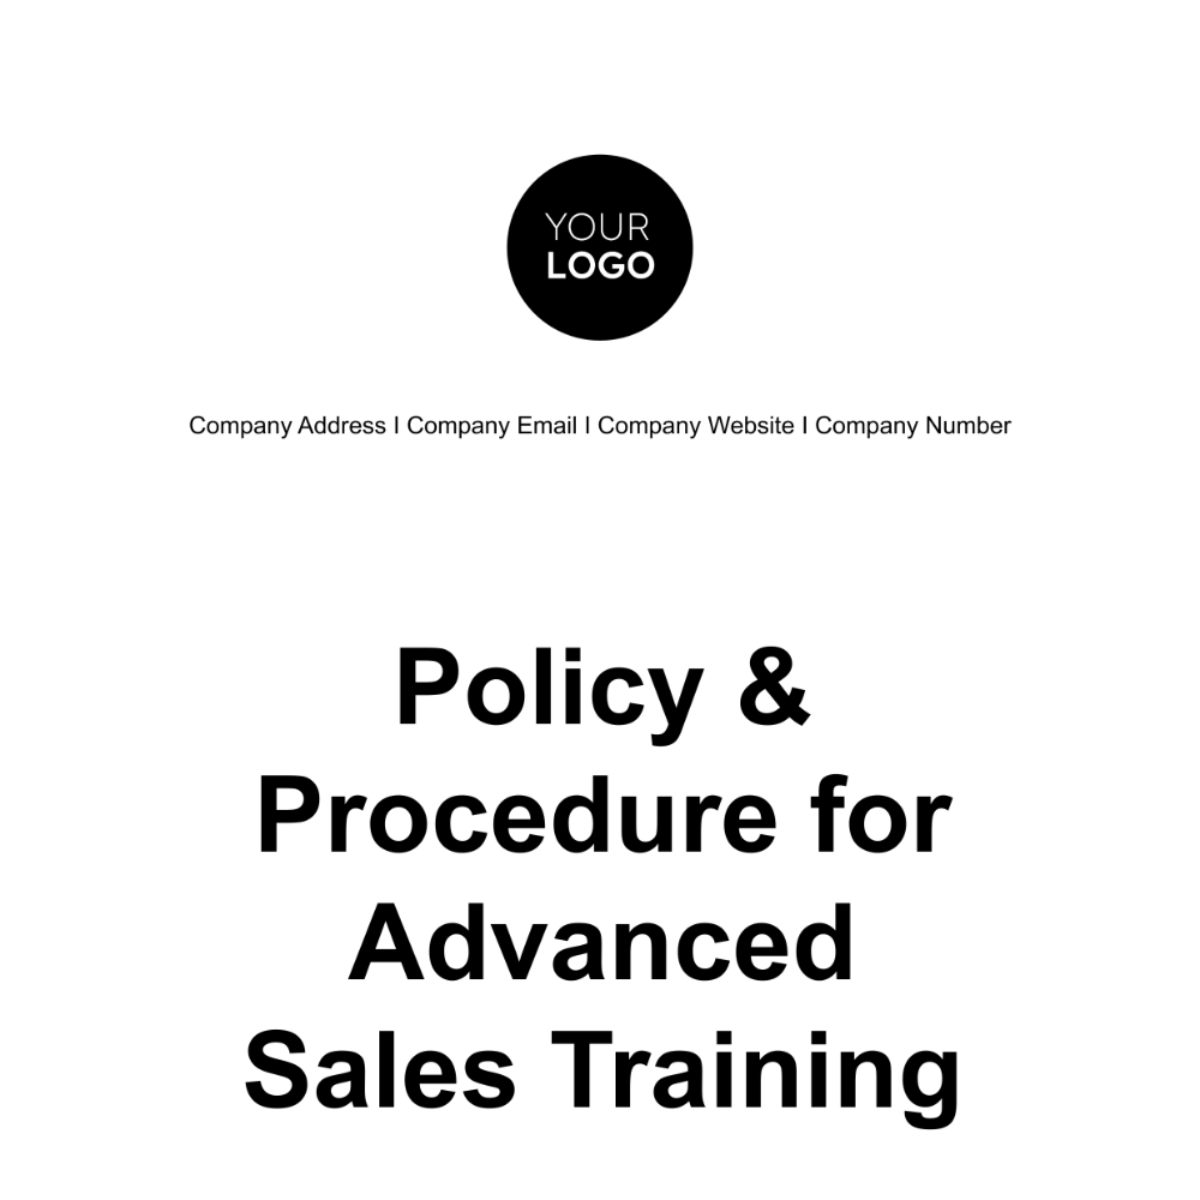 Free Policy & Procedure for Advanced Sales Training Template